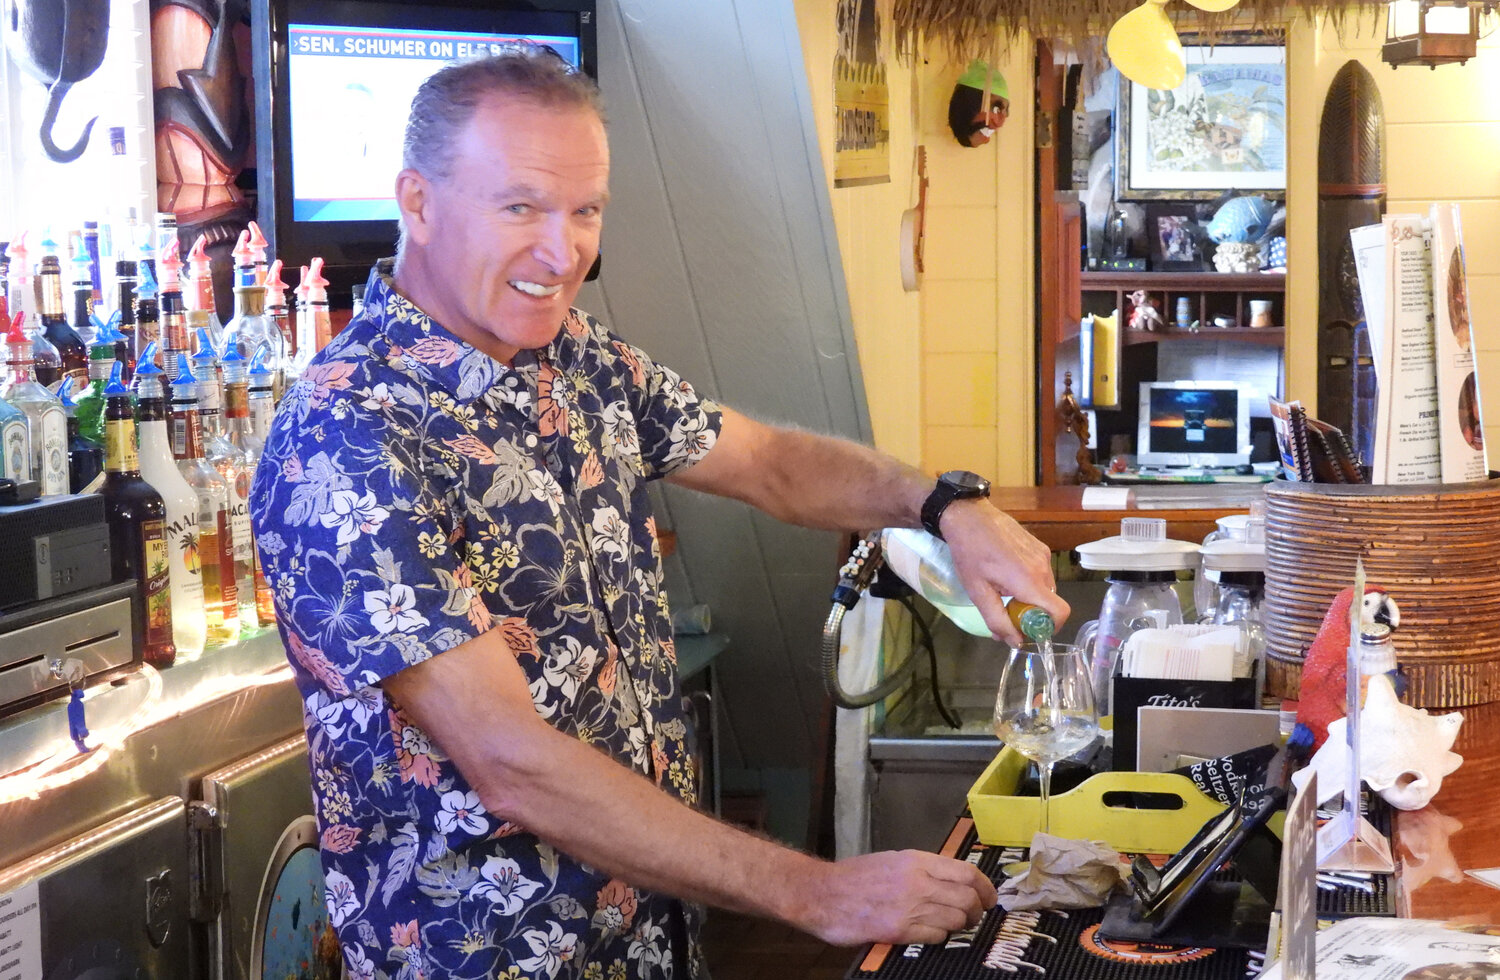 Andy Brown manages the Shipwreck Bar and Grill at Captain John's and is pictured here pouring a drink.